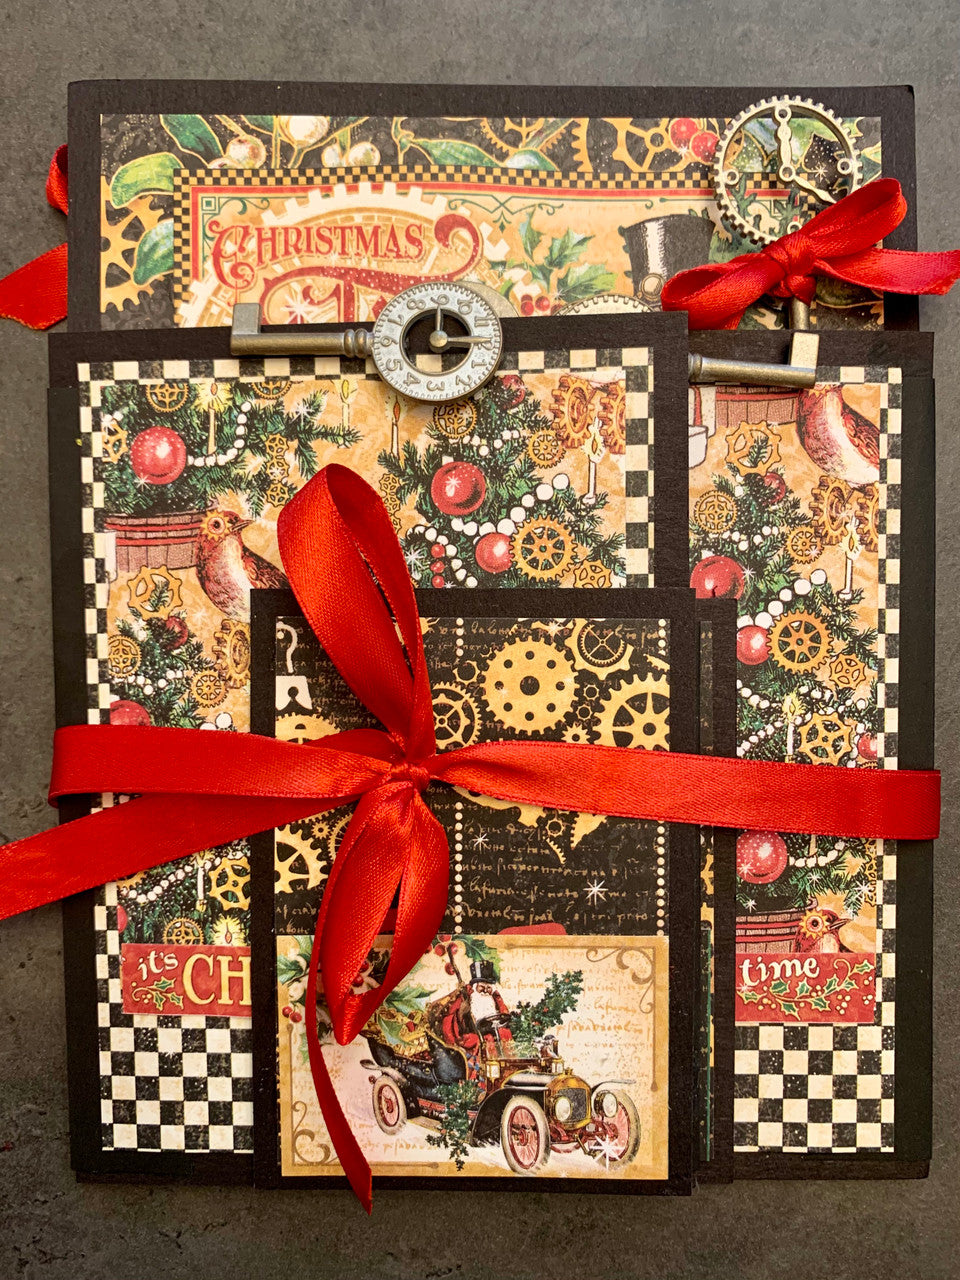 Retro Christmas: Retro Christmas Collection Kit - Designs By Reminisce